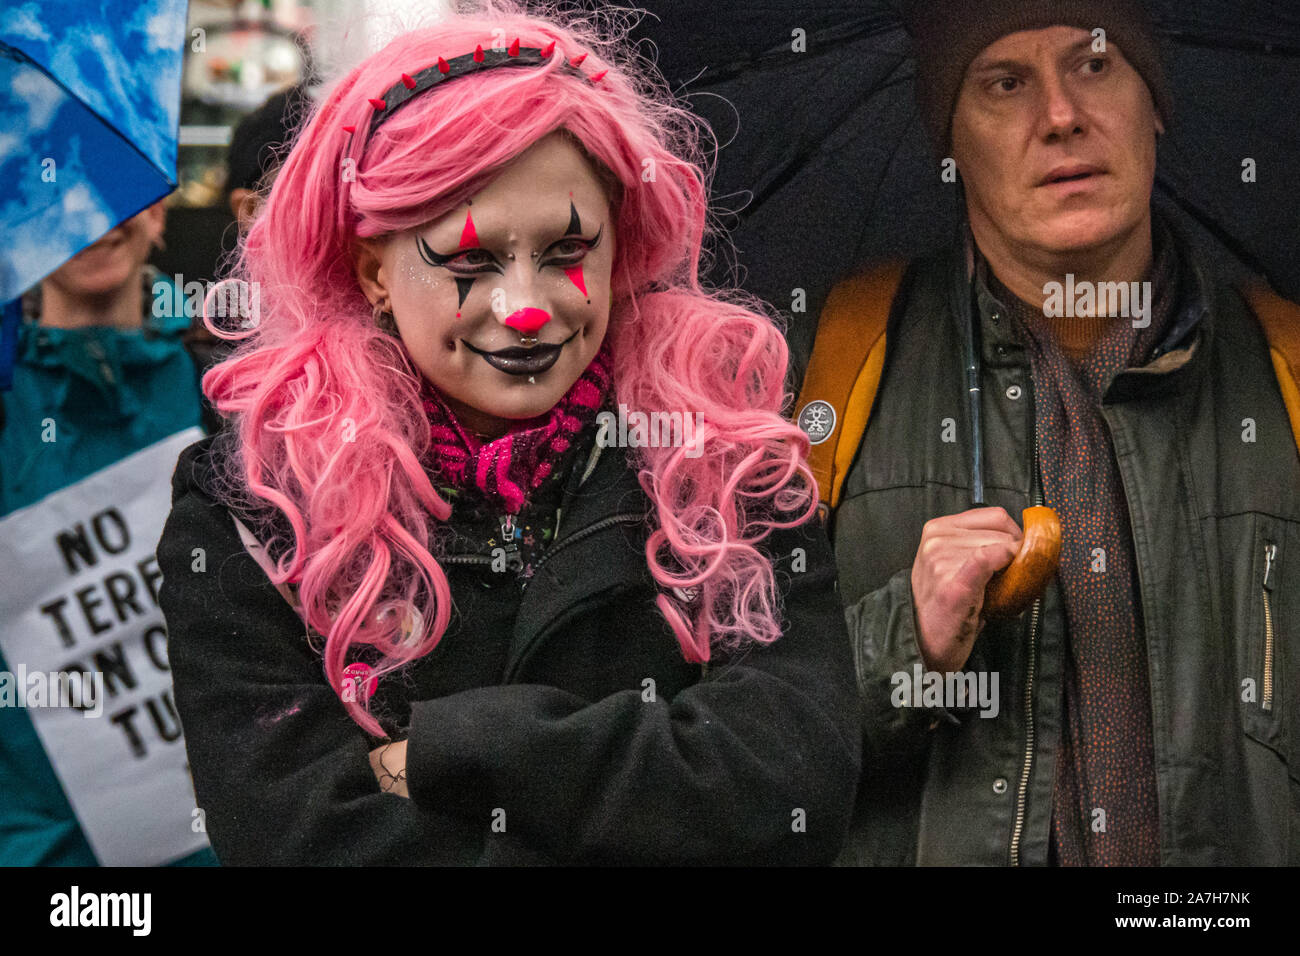 London, UK. 2nd November 2019. A protest in Soho Square opposed the activities of a new hate group which promotes transphobia, calling itself the 'LGB Alliance', claiming it is protecting LGB people. The protest pointed out that trans and non-binary people have always been a part of the gay community and played an important part in the fight for gay rights and there is no place for such bi-phobic and gay-separist views in the gay community. Peter Marshall/Alamy Live News Stock Photo